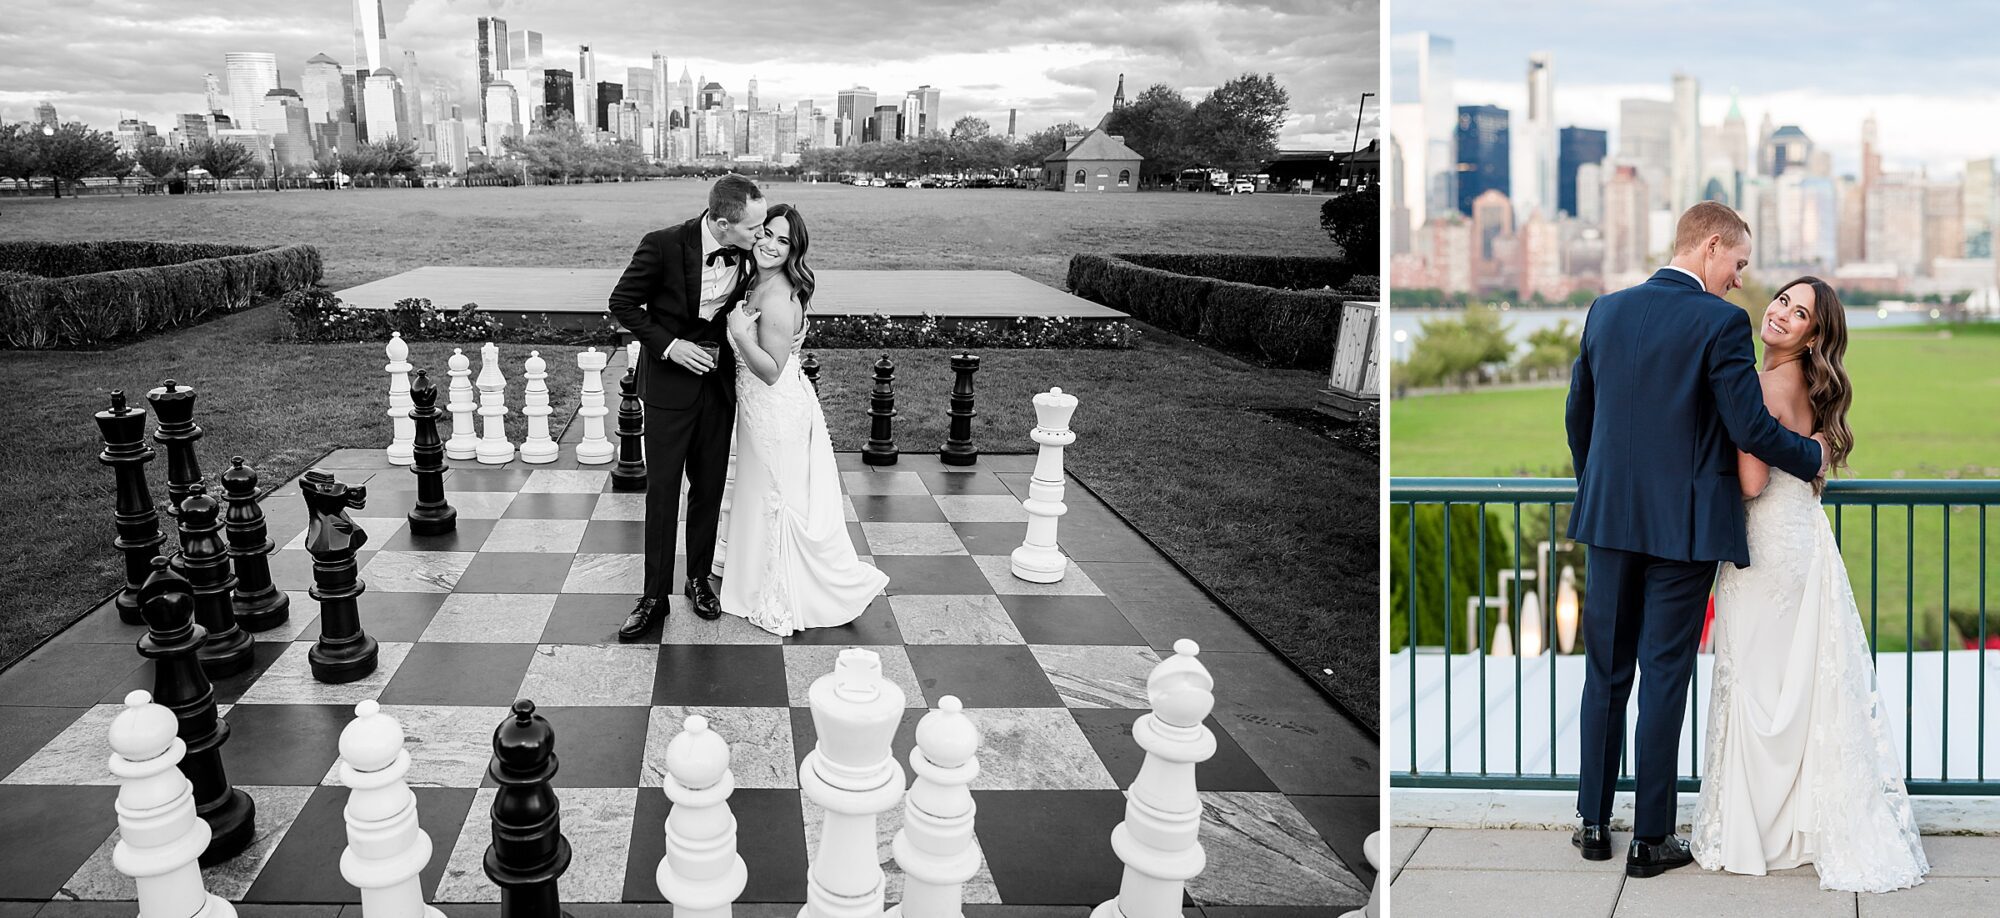 A bride and groom pose on a chess board in front of a city skyline.